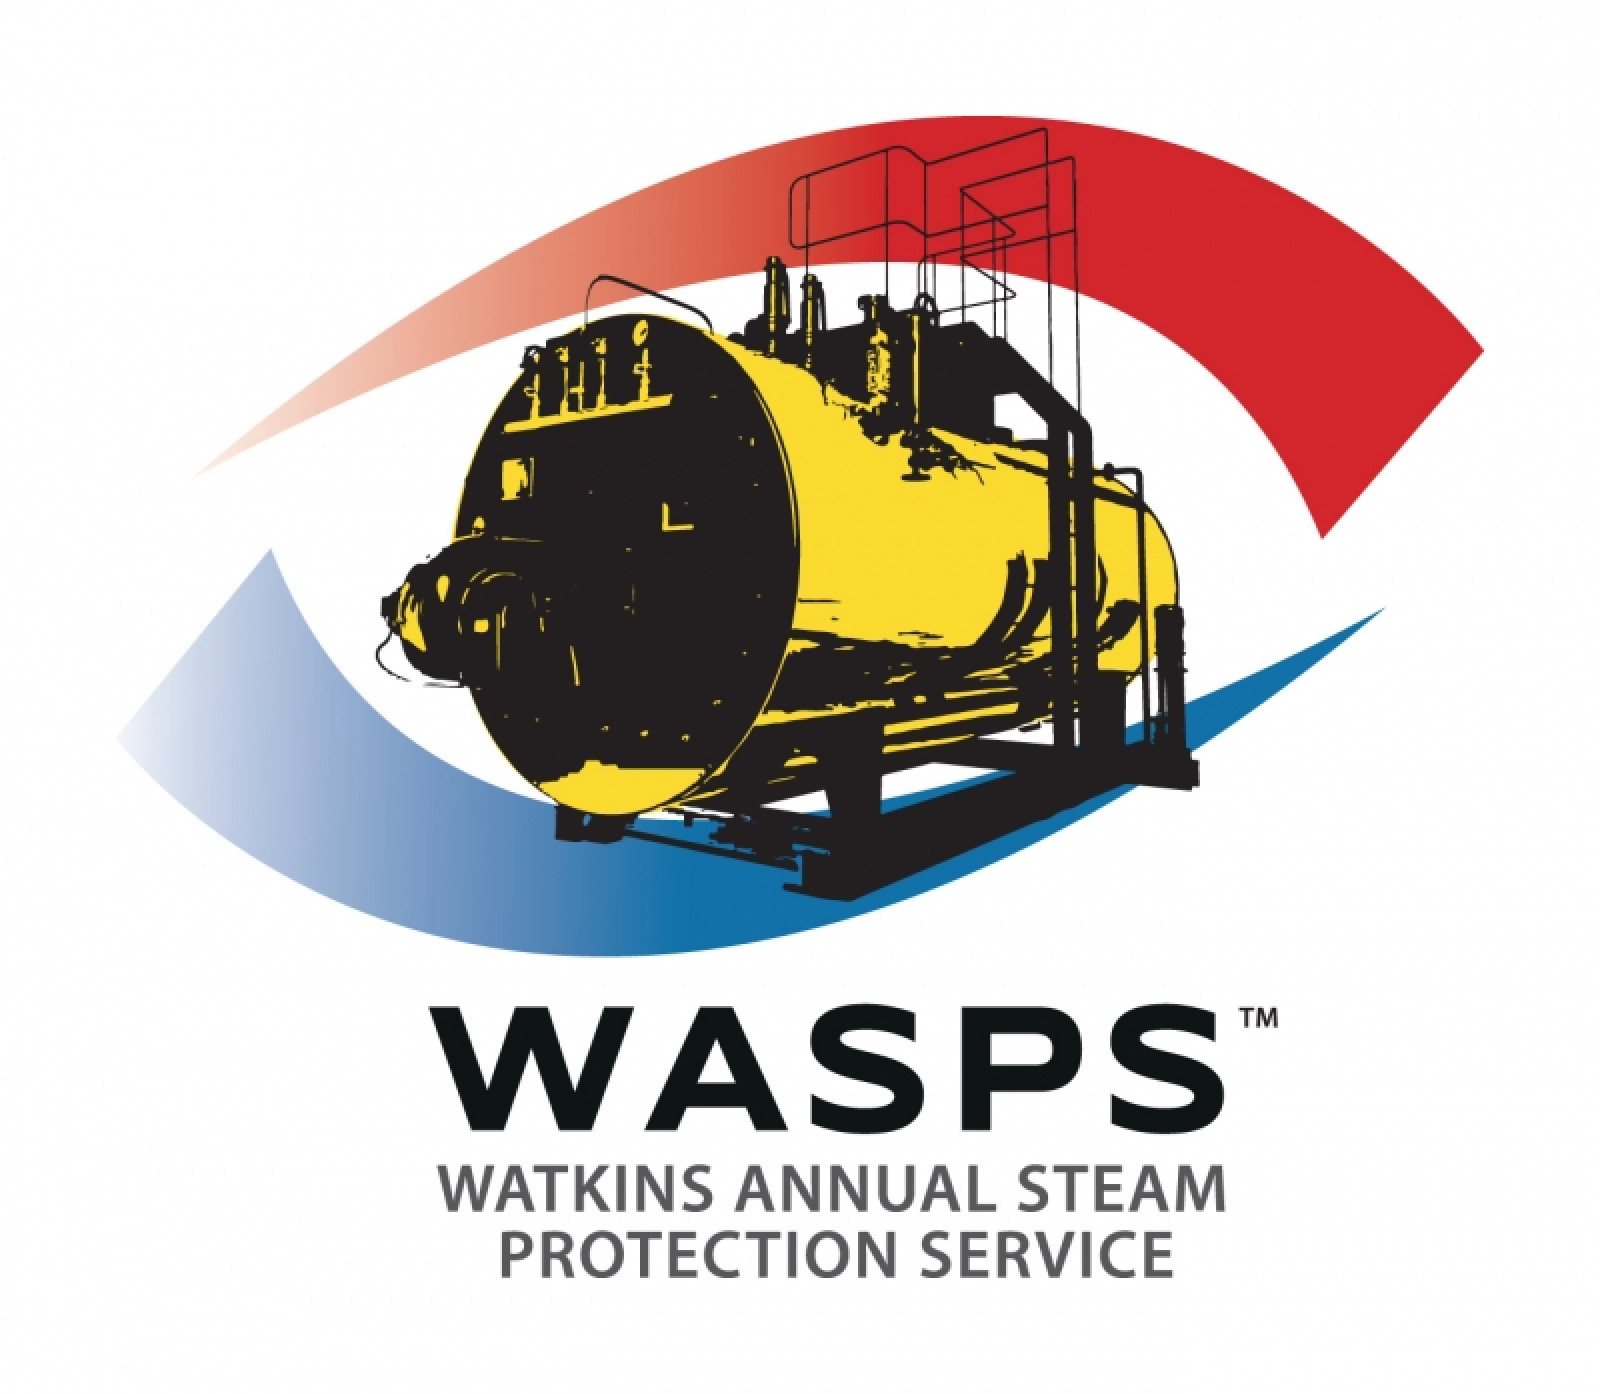 Watkins Annual Steam Protection Service (WASPS)